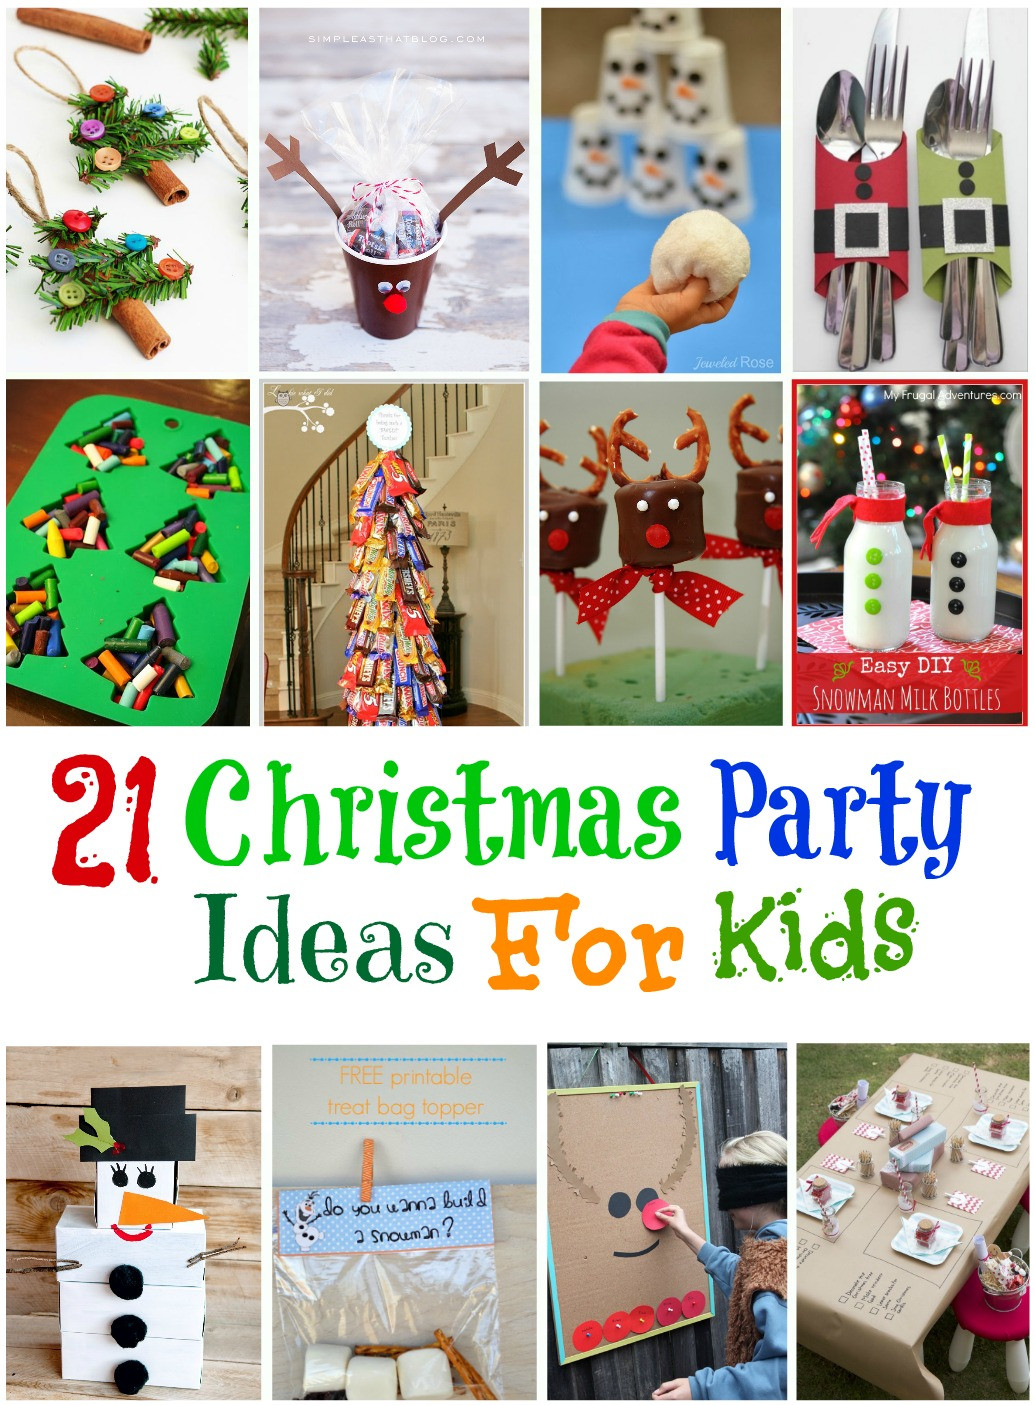 Fun Ideas For Holiday Party
 20 Frozen Birthday Party Ideas